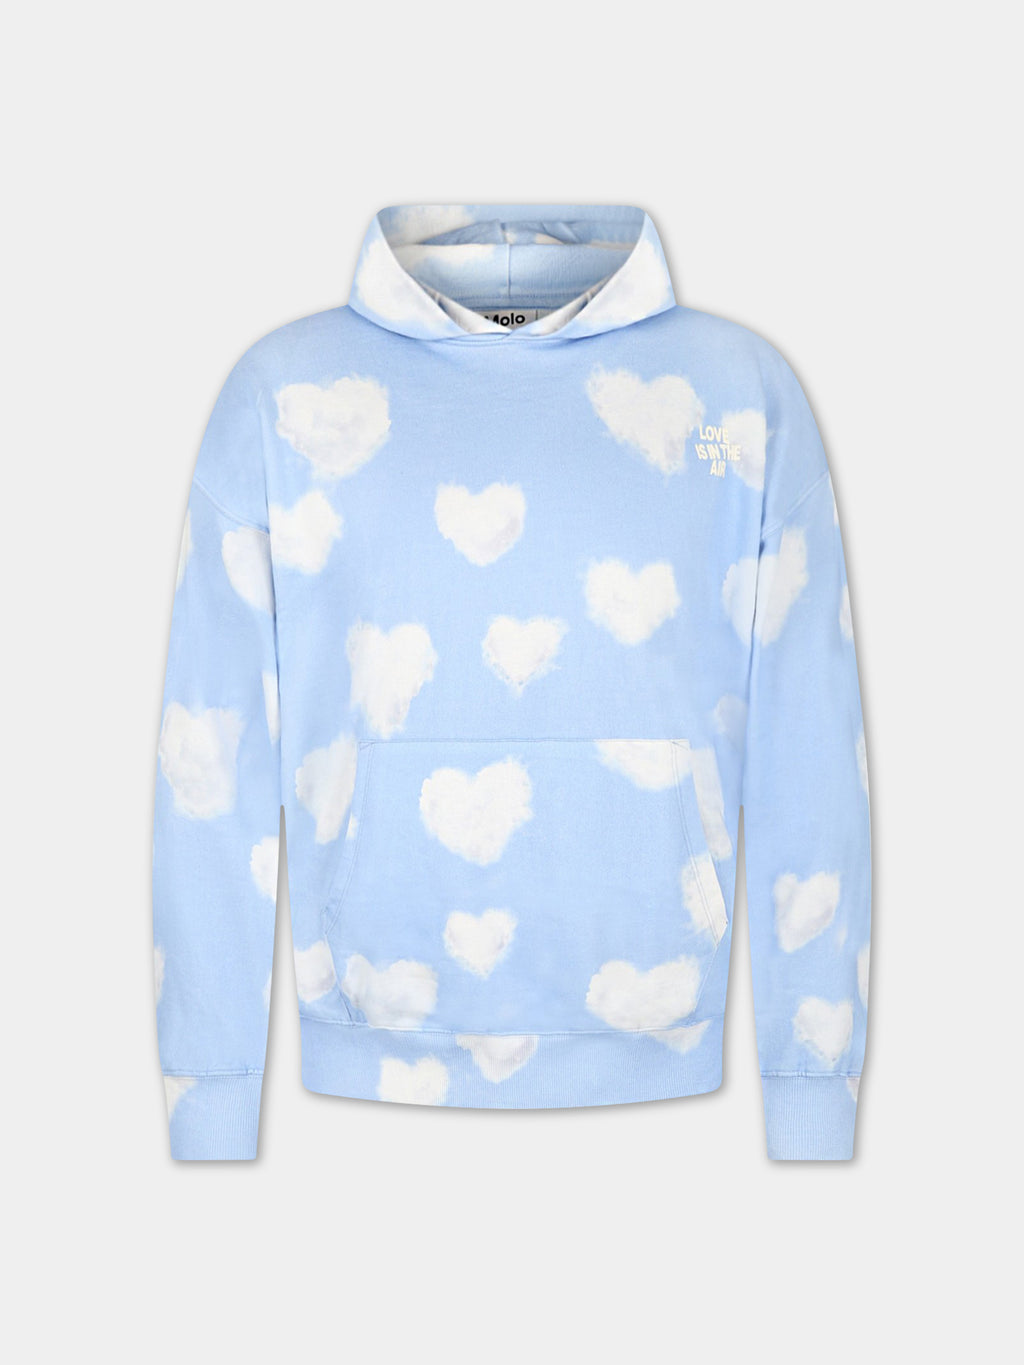 Light-blue sweatshirt for adults with iconic white clouds